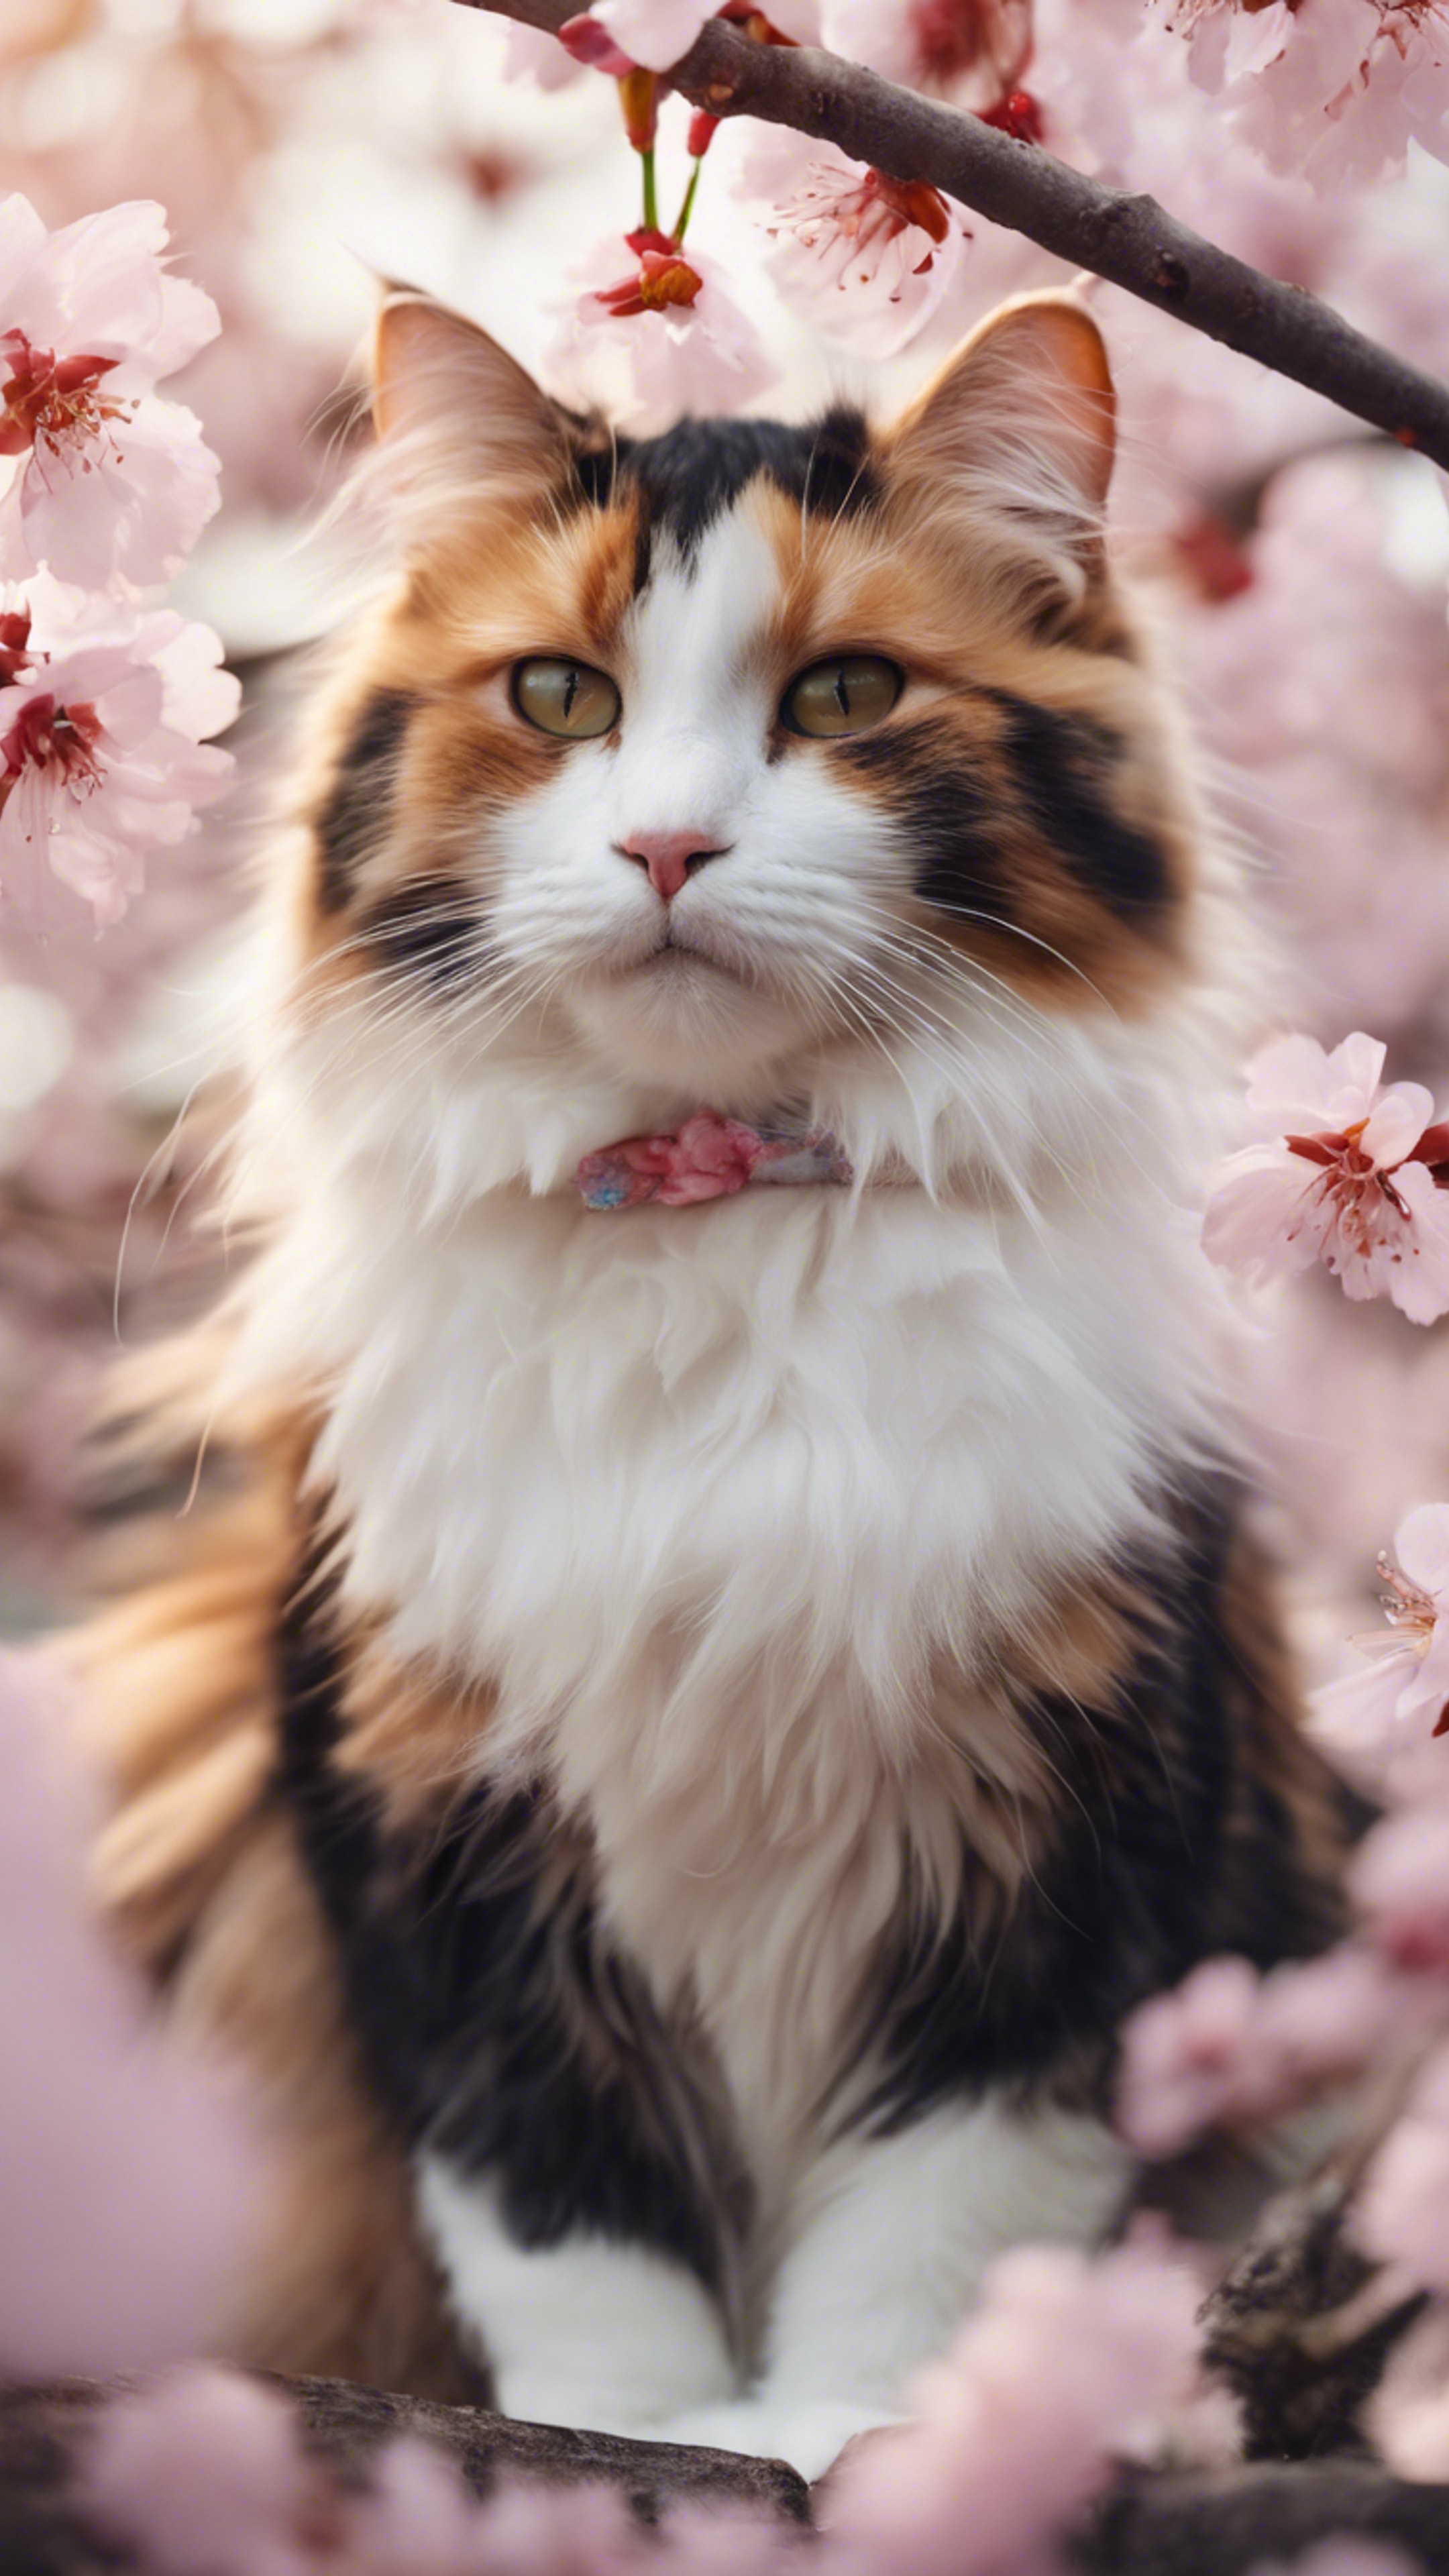 A fluffy calico cat in a cute pose sitting amongst cherry blossoms. Hintergrund[3cf3847c7c9c4f38aba7]